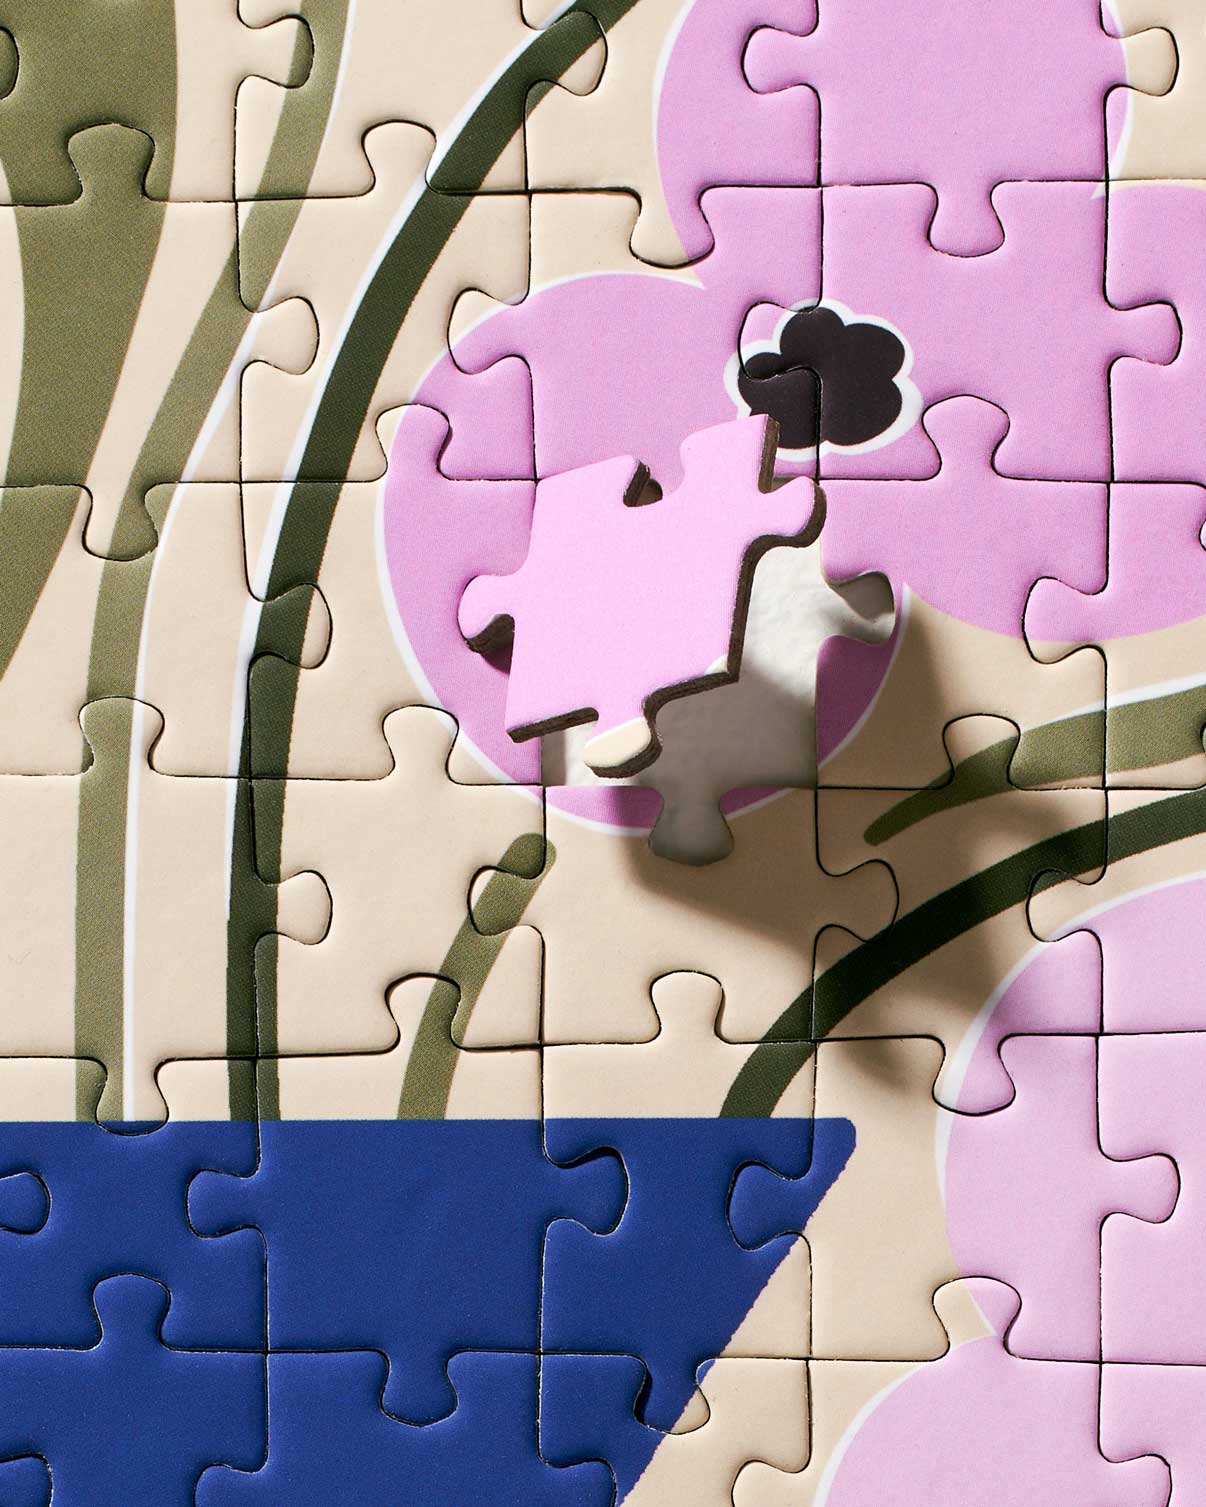 Vase of Flowers Puzzle by Frankie Penwill | Ordinary Habit